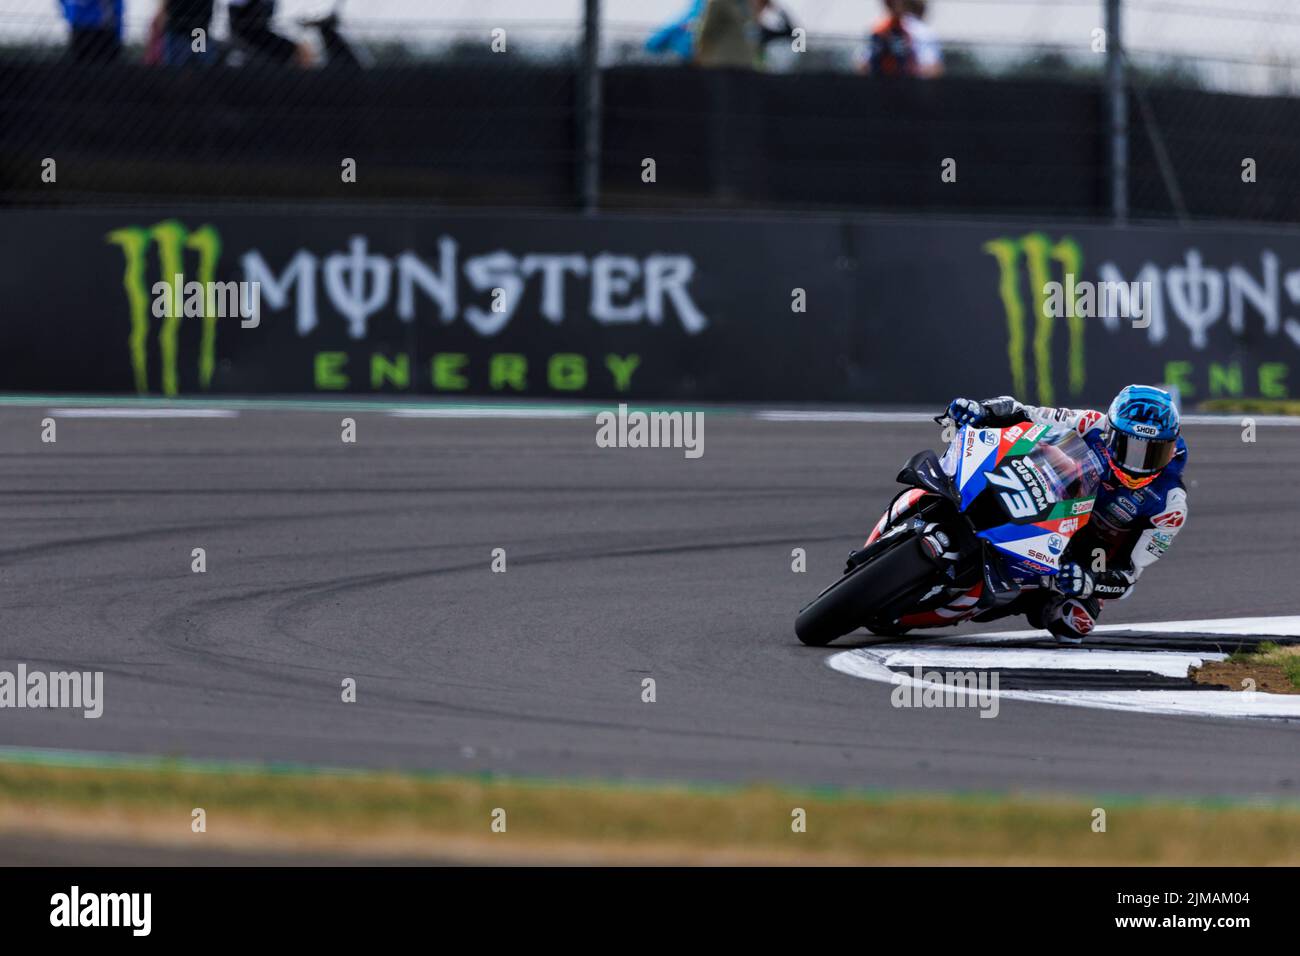 Silverstone, UK. 5th August 2022; Silverstone Circuit, Silverstone, Northamptonshire, England: British MotoGP Grand Prix, Free Practice: Number 73 LCR Honda Castrol bike ridden by Alex Marquez during free practice 2 at the British MotoGP Credit: Action Plus Sports Images/Alamy Live News Stock Photo